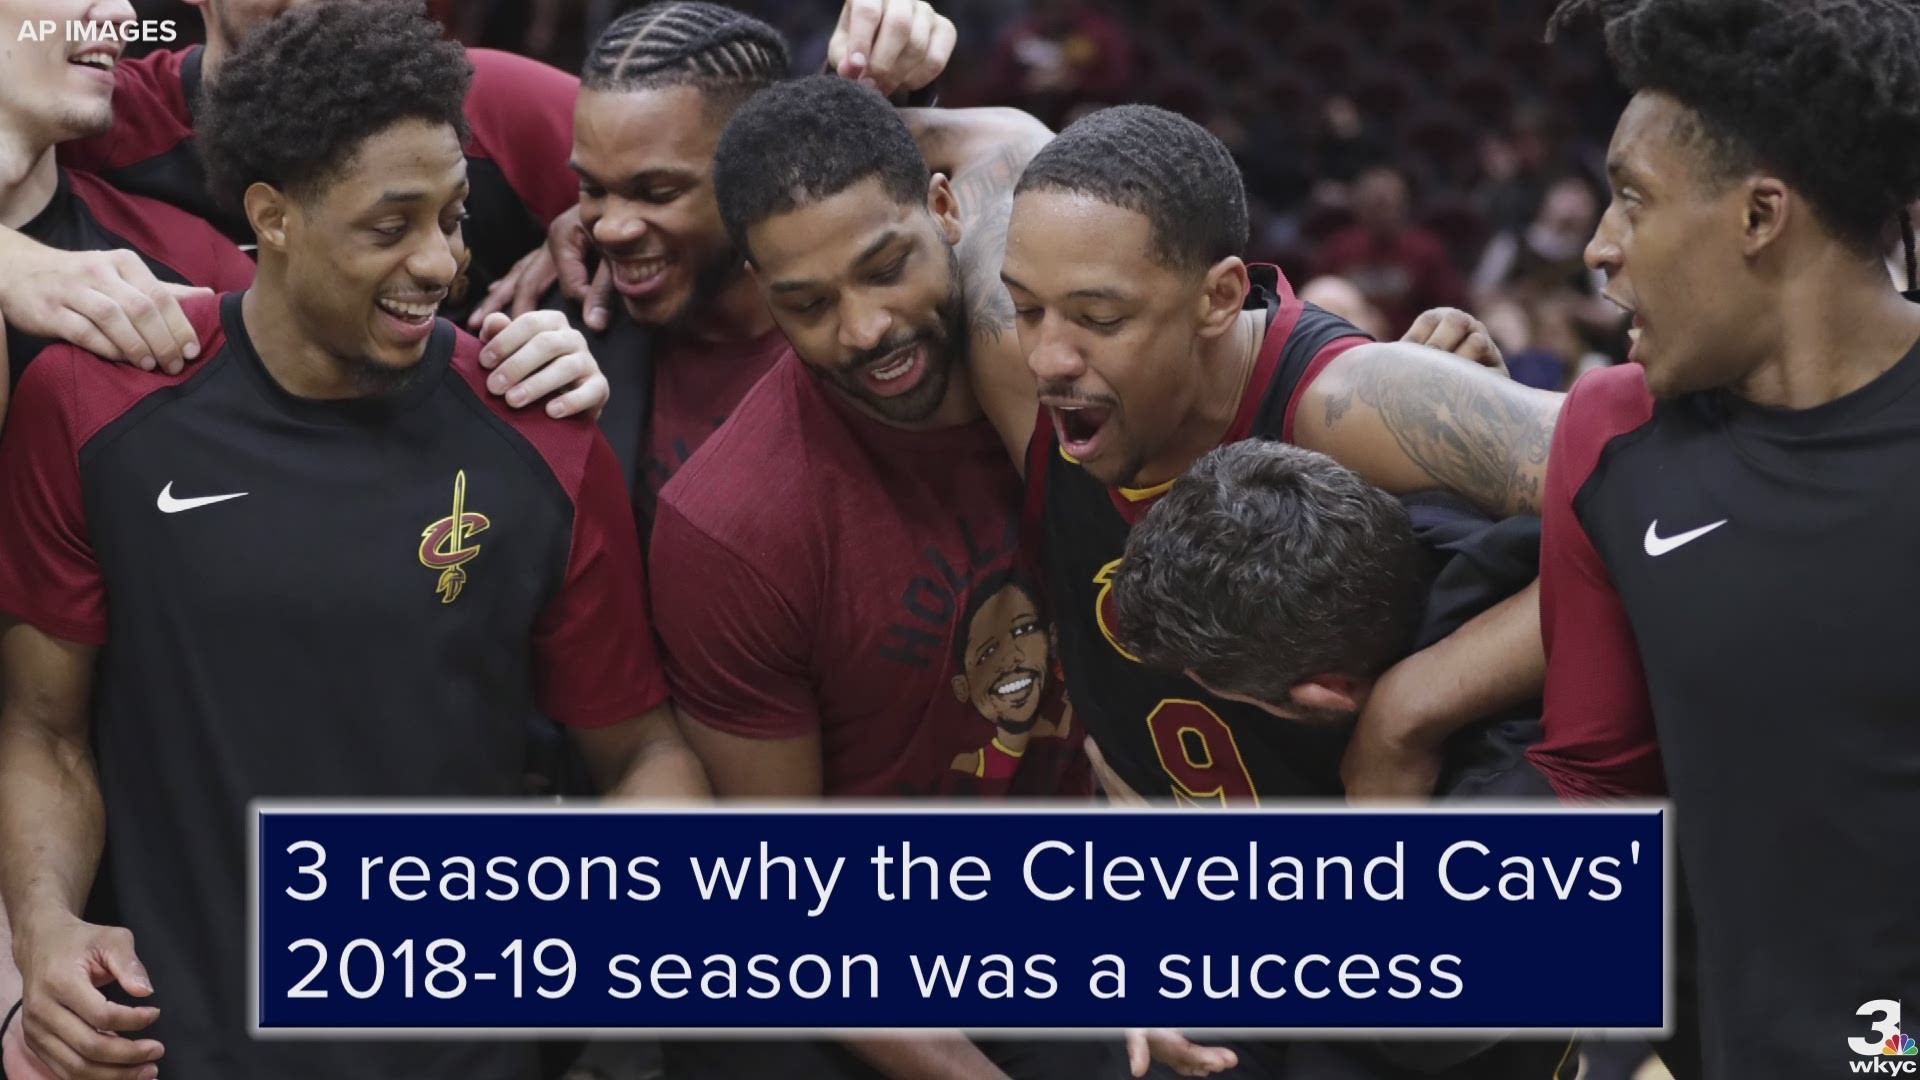 Despite their 19-63 record, the Cleveland Cavaliers still achieved plenty during the 2018-19 NBA season.